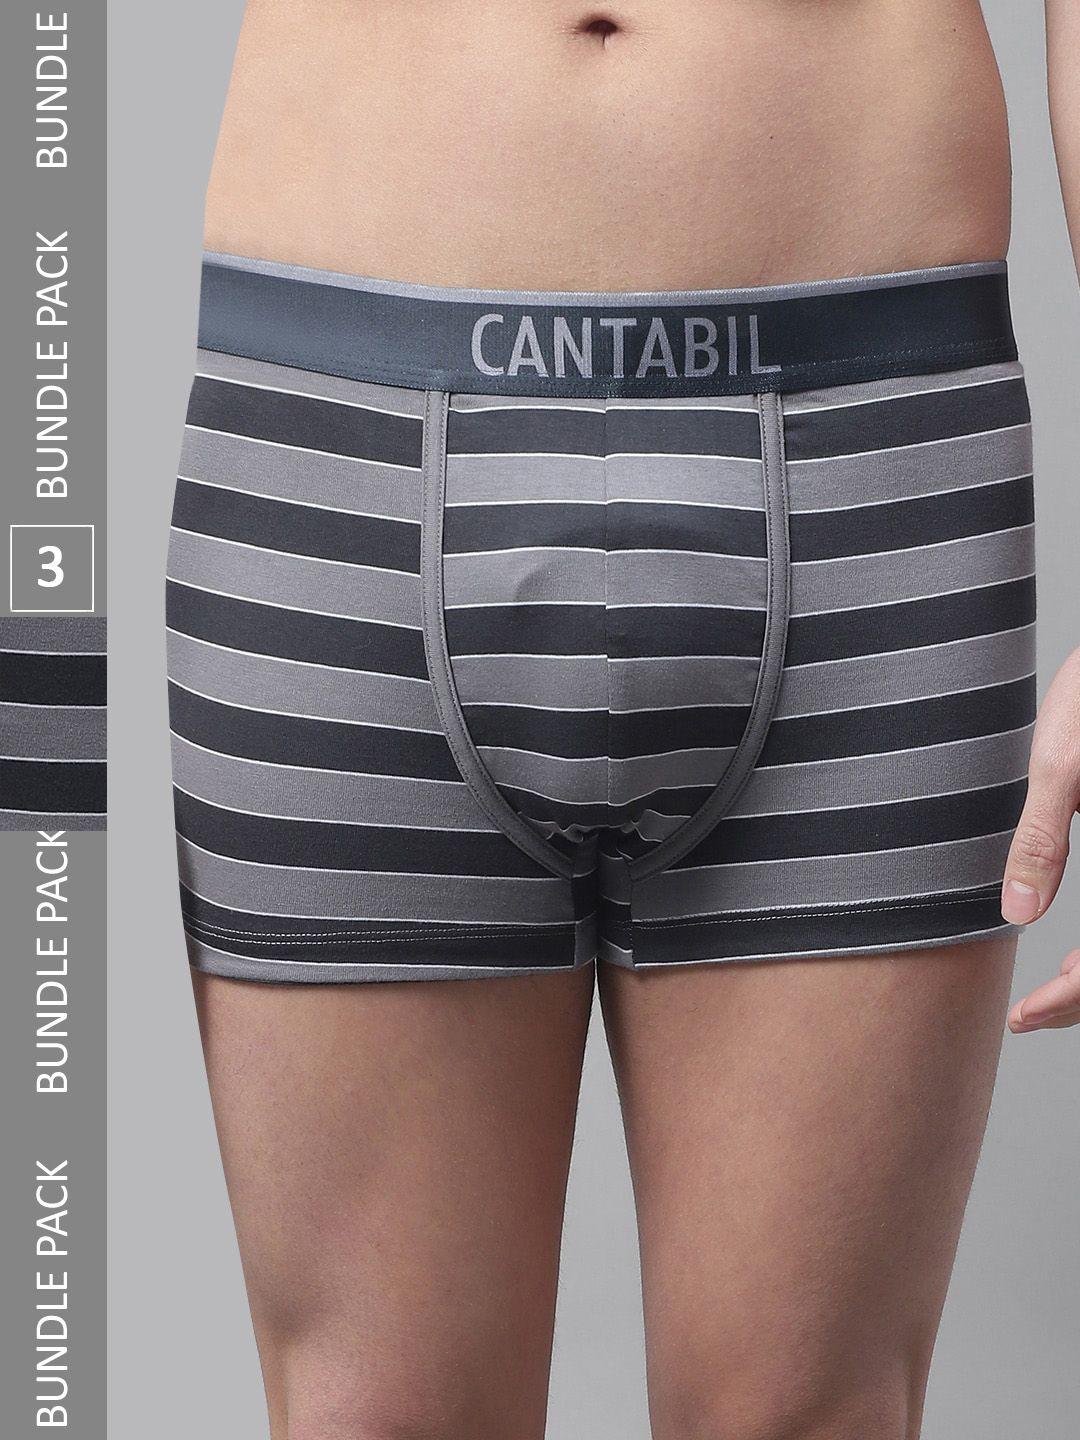 Cantabil Men Pack of 3 Striped Low-Rise Cotton Boxer Briefs